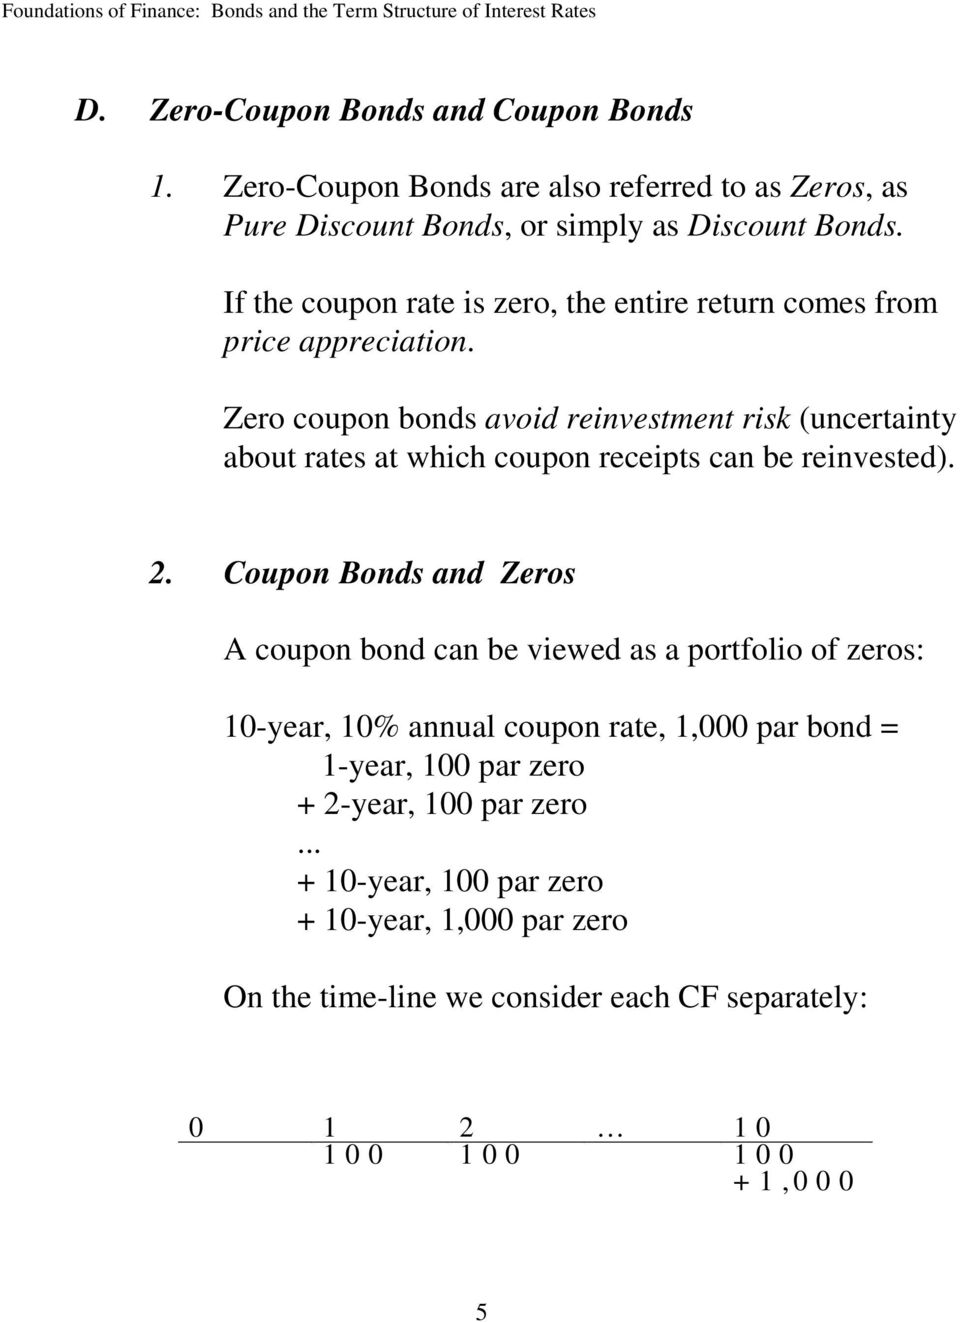 Zero coupon bonds avoid reinvestment risk (uncertainty about rates at which coupon receipts can be reinvested). 2.